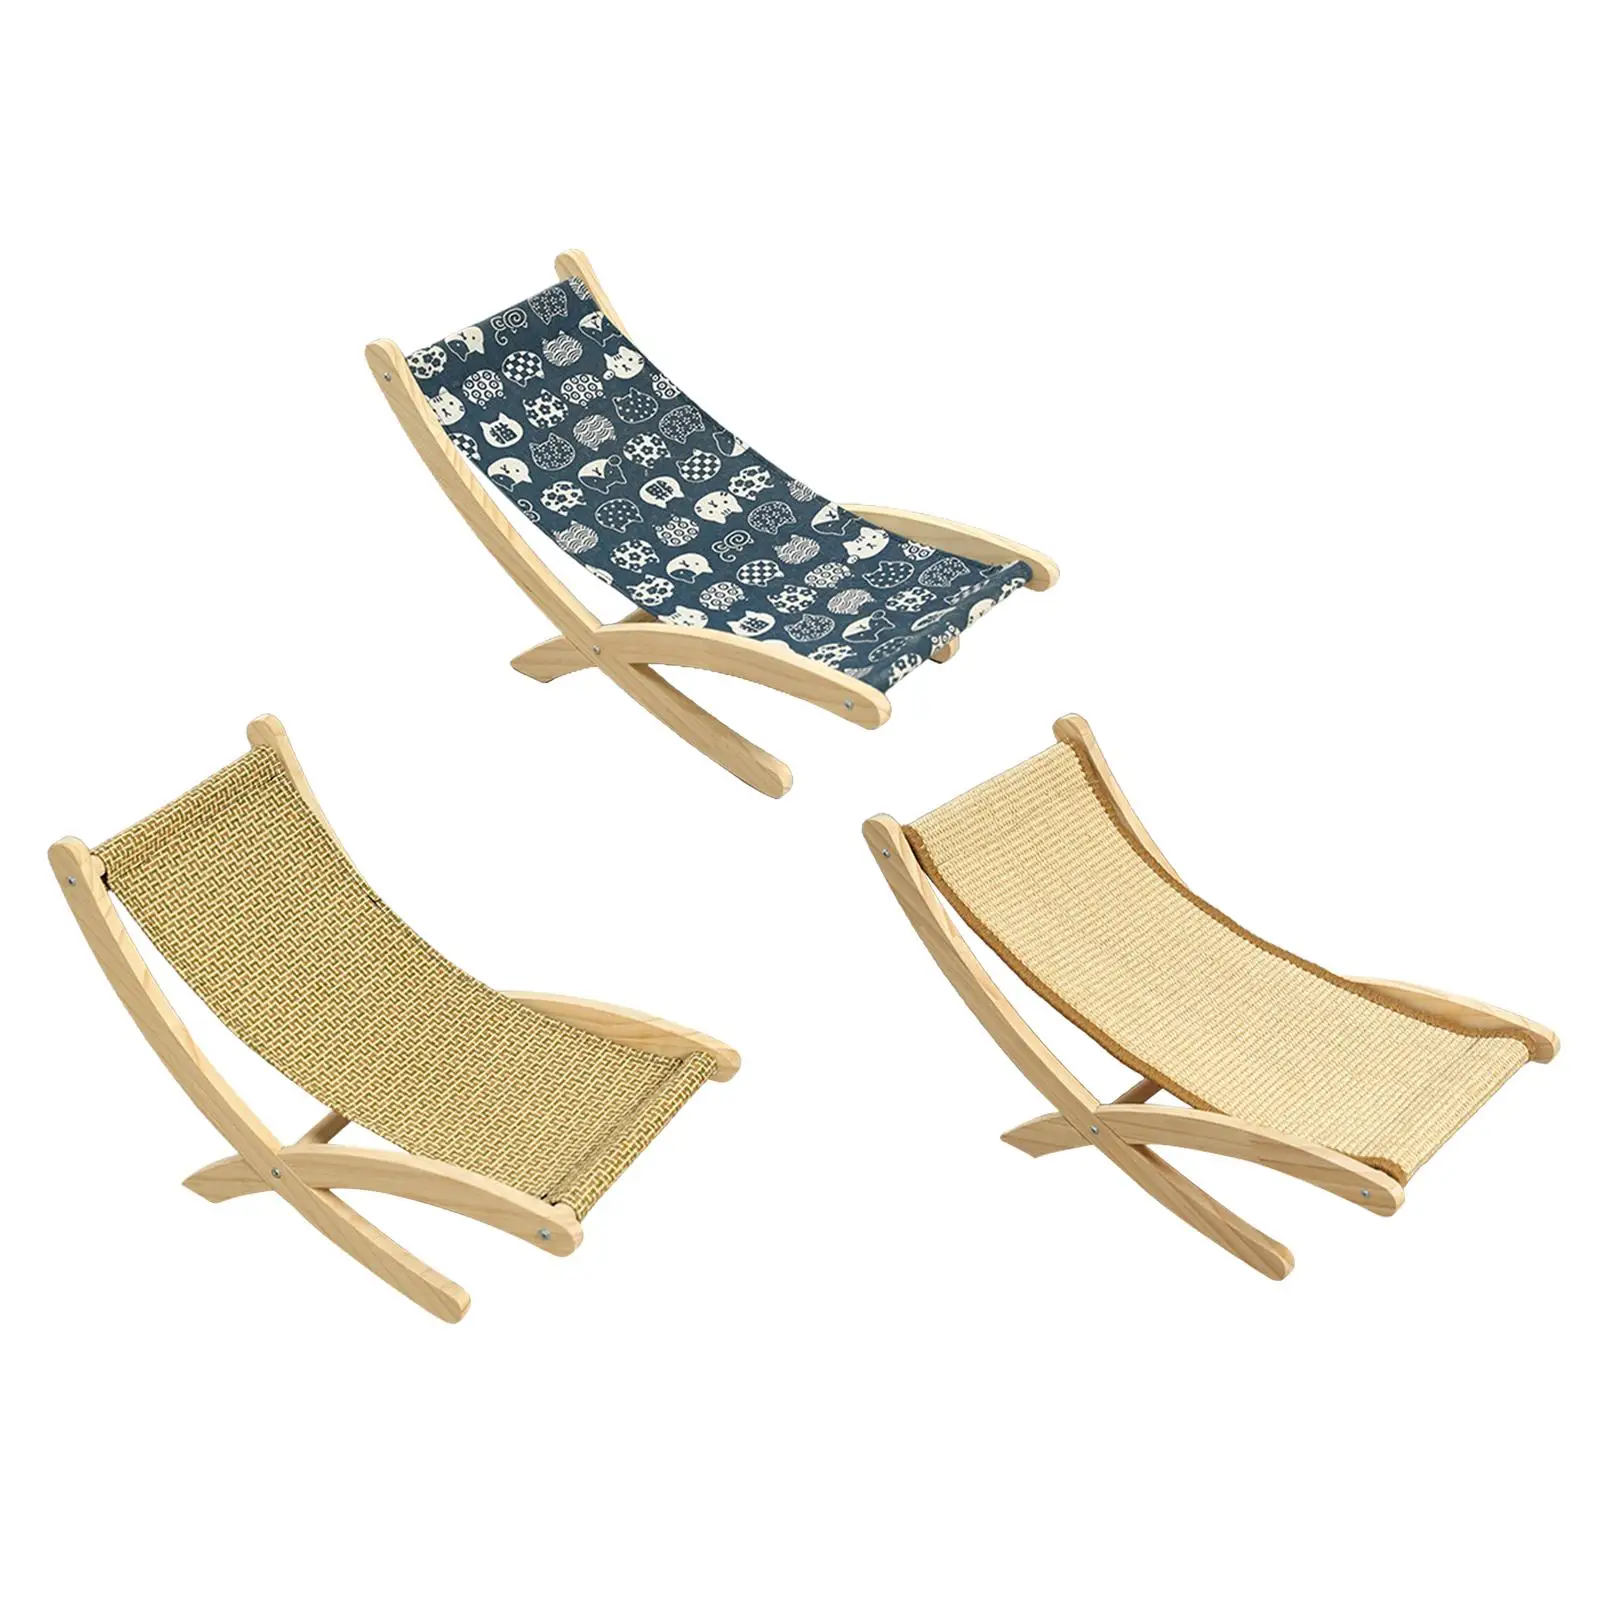 Cat Lounge Chair Wood Swing Chair Cats Elevated Bed Portable Rocking Chair Cat Hammock Couch for Small Animal Small Dogs Rabbit